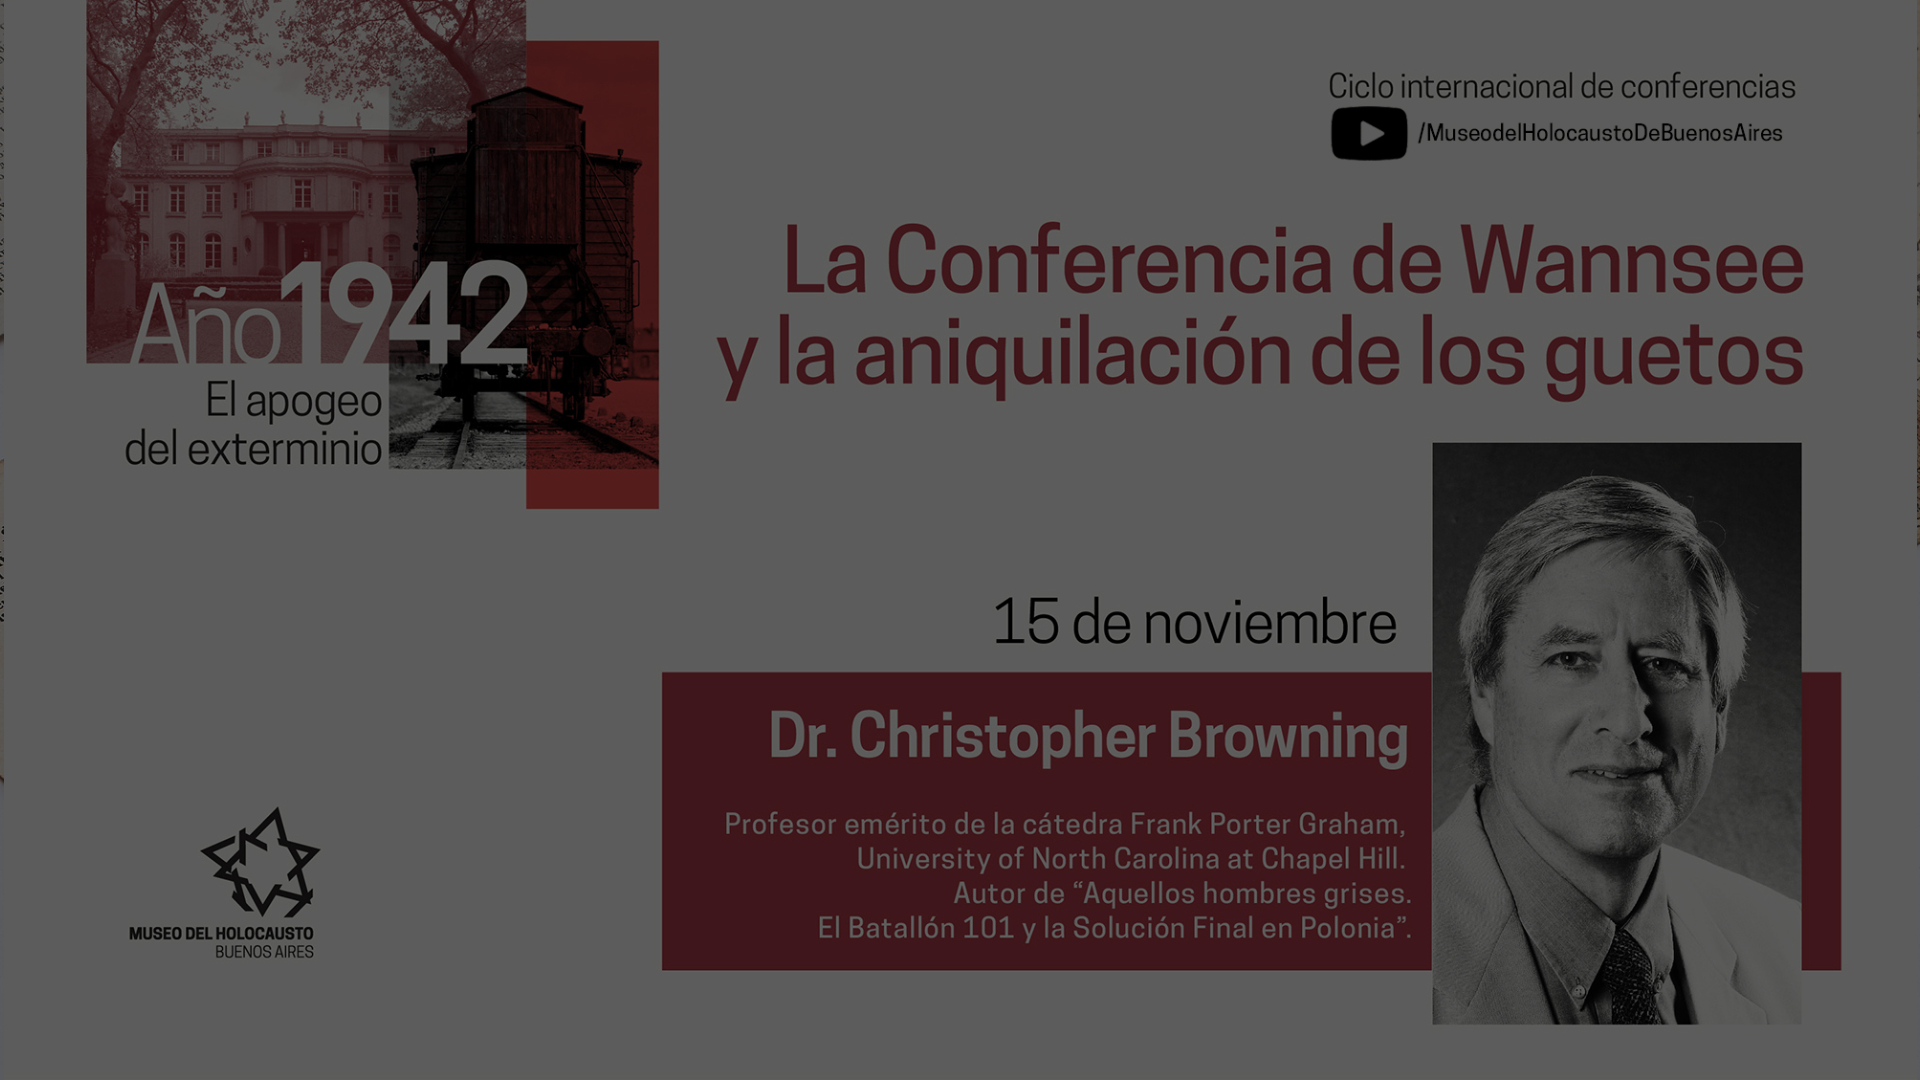 VIDEO 1 | Año 1942 | Dr. Christopher Browning | 